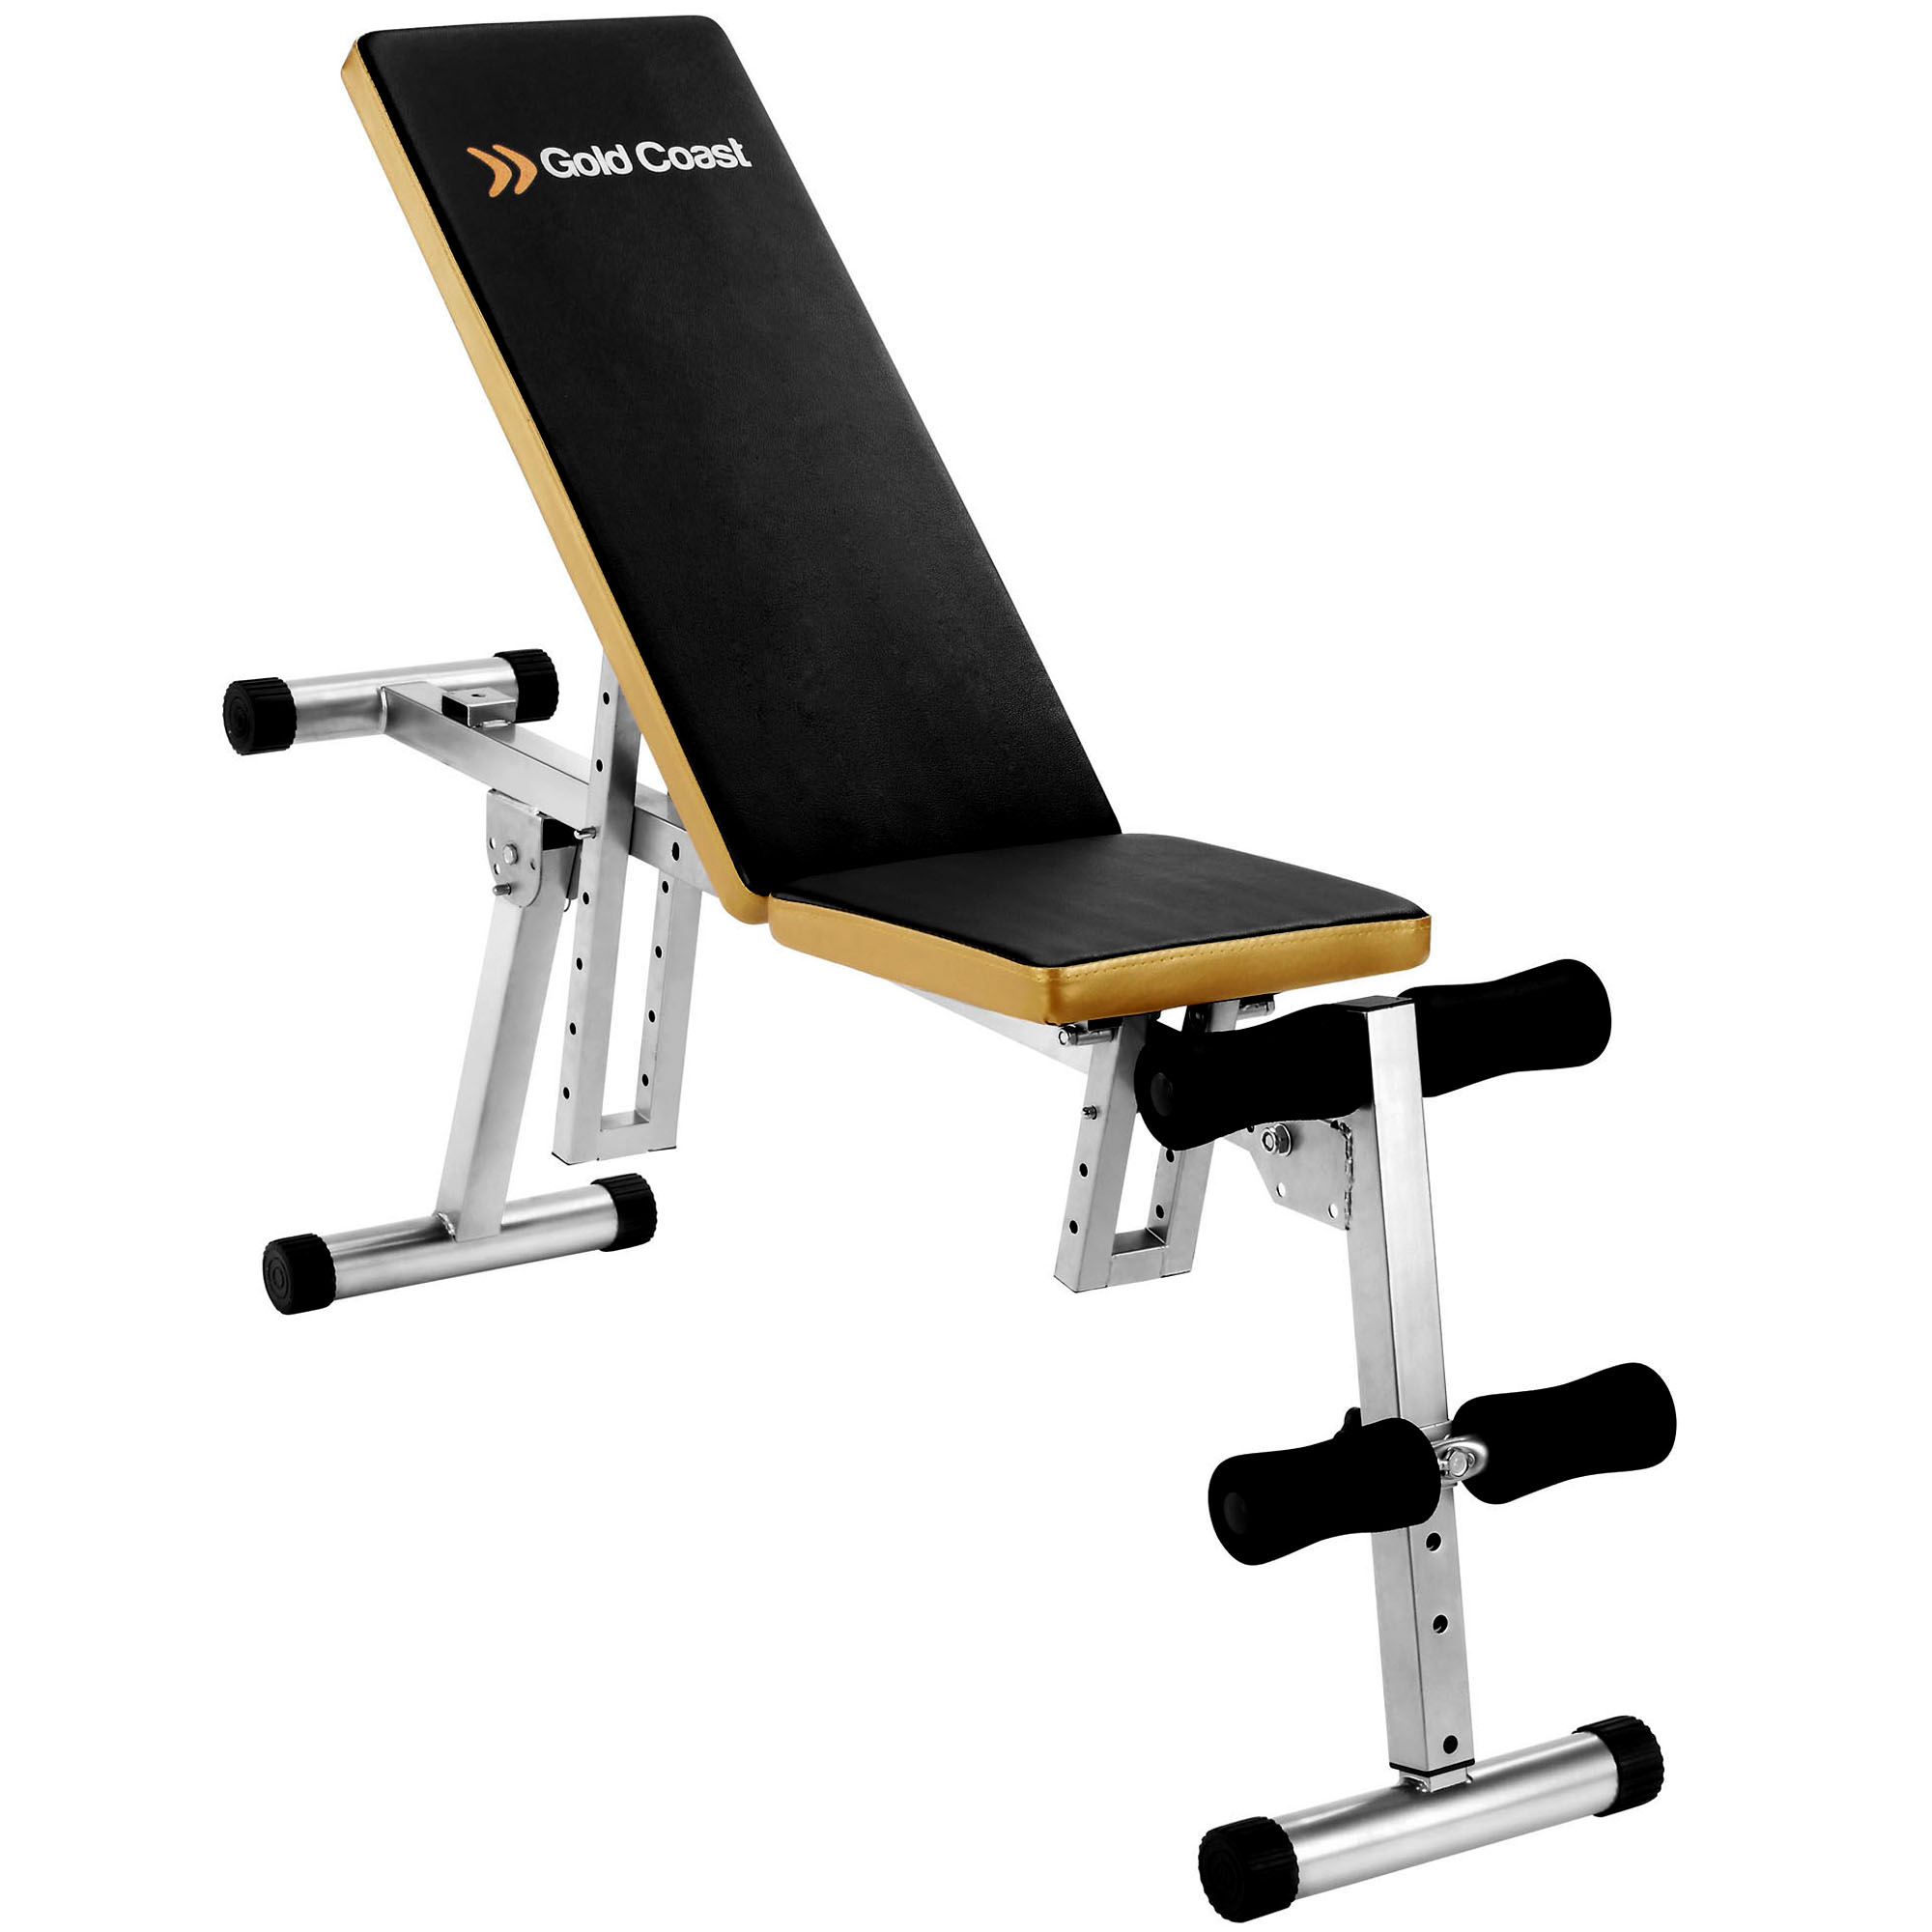 Gold Coast Folding Dumbbell Home Weight Lifting Gym Sit Up Exercise Bench